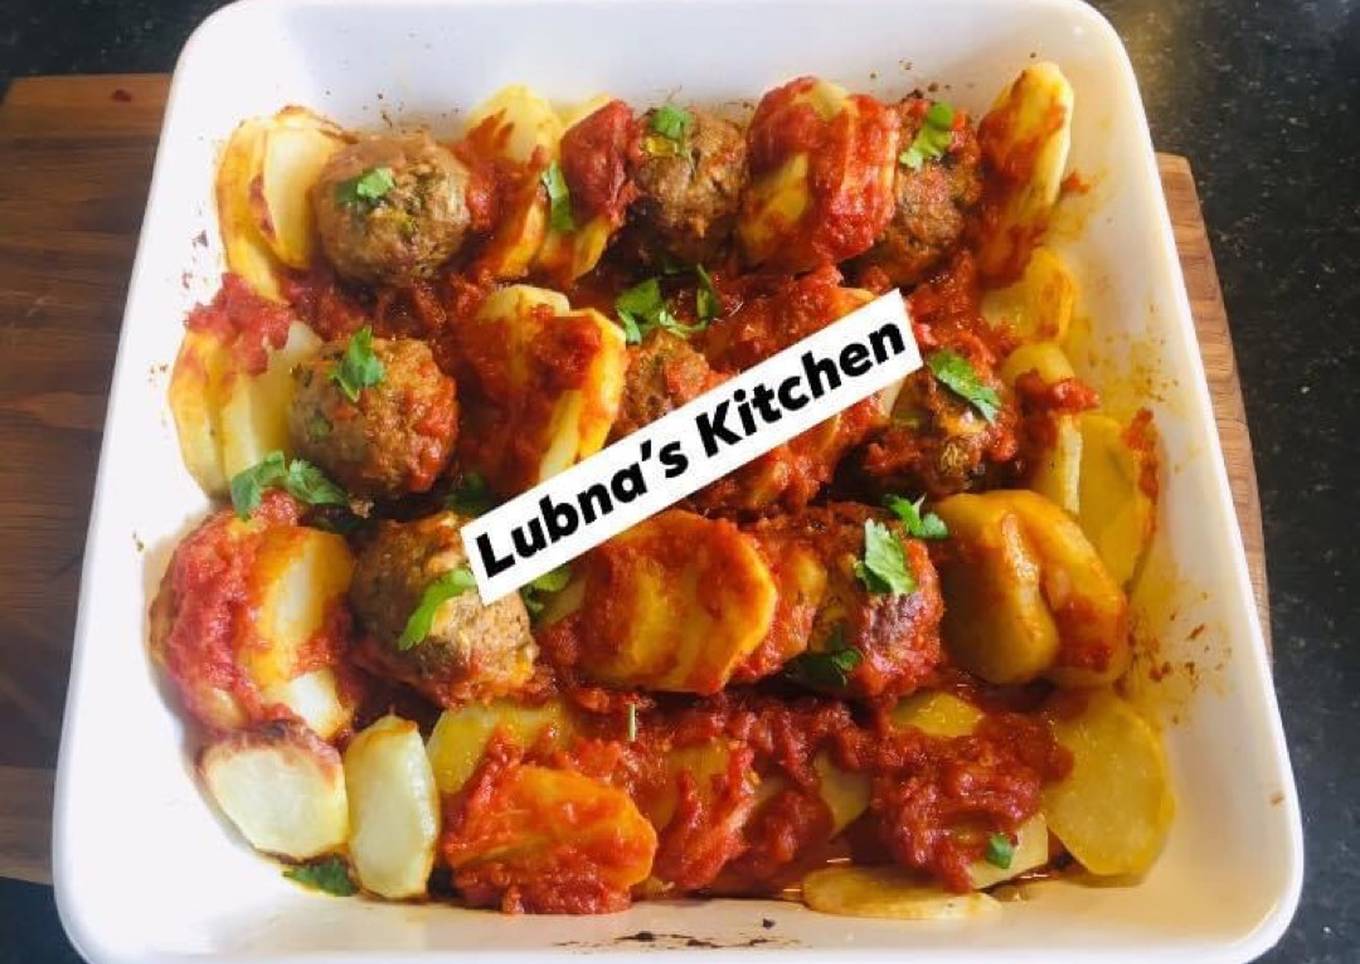 baked meatballs and potatoes in tomato sauce